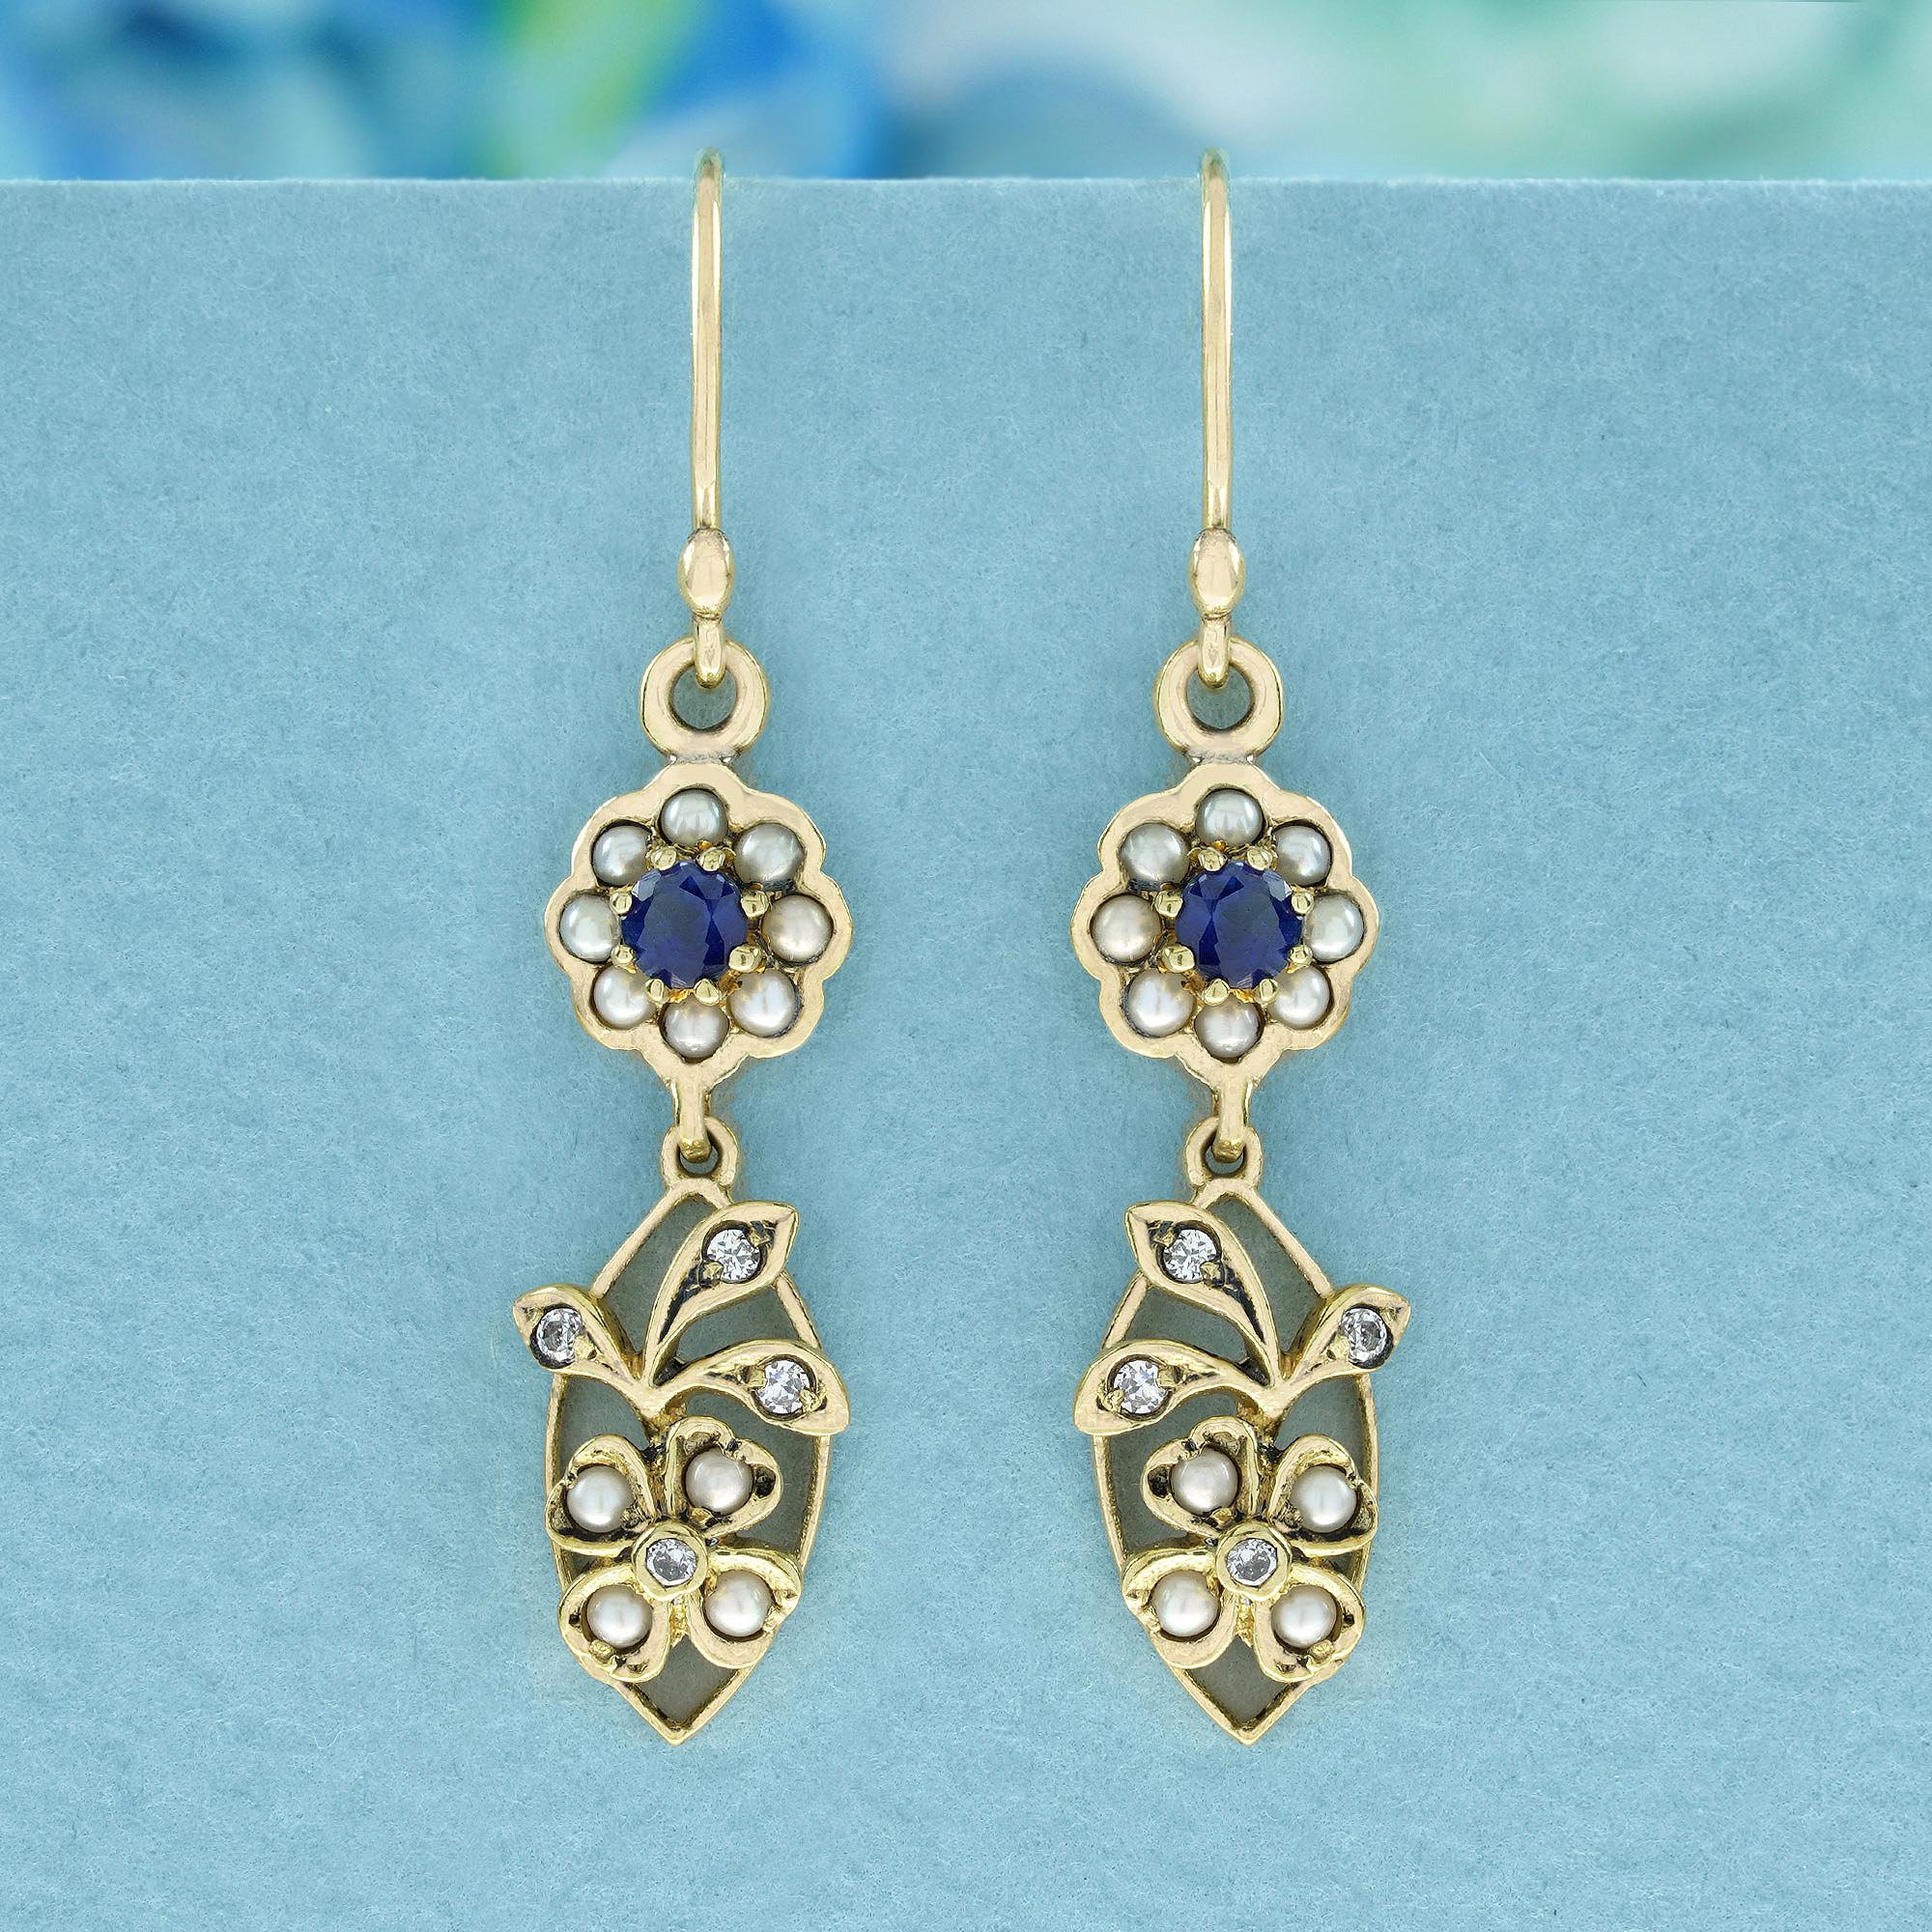 The Vintage Style yellow gold earrings feature a top tier floral cluster design. Each earring is composed of multiple shiny round white pearls and a round and faceted Blue Sapphire gemstone at its center, and a bottom tier floral cluster is composed